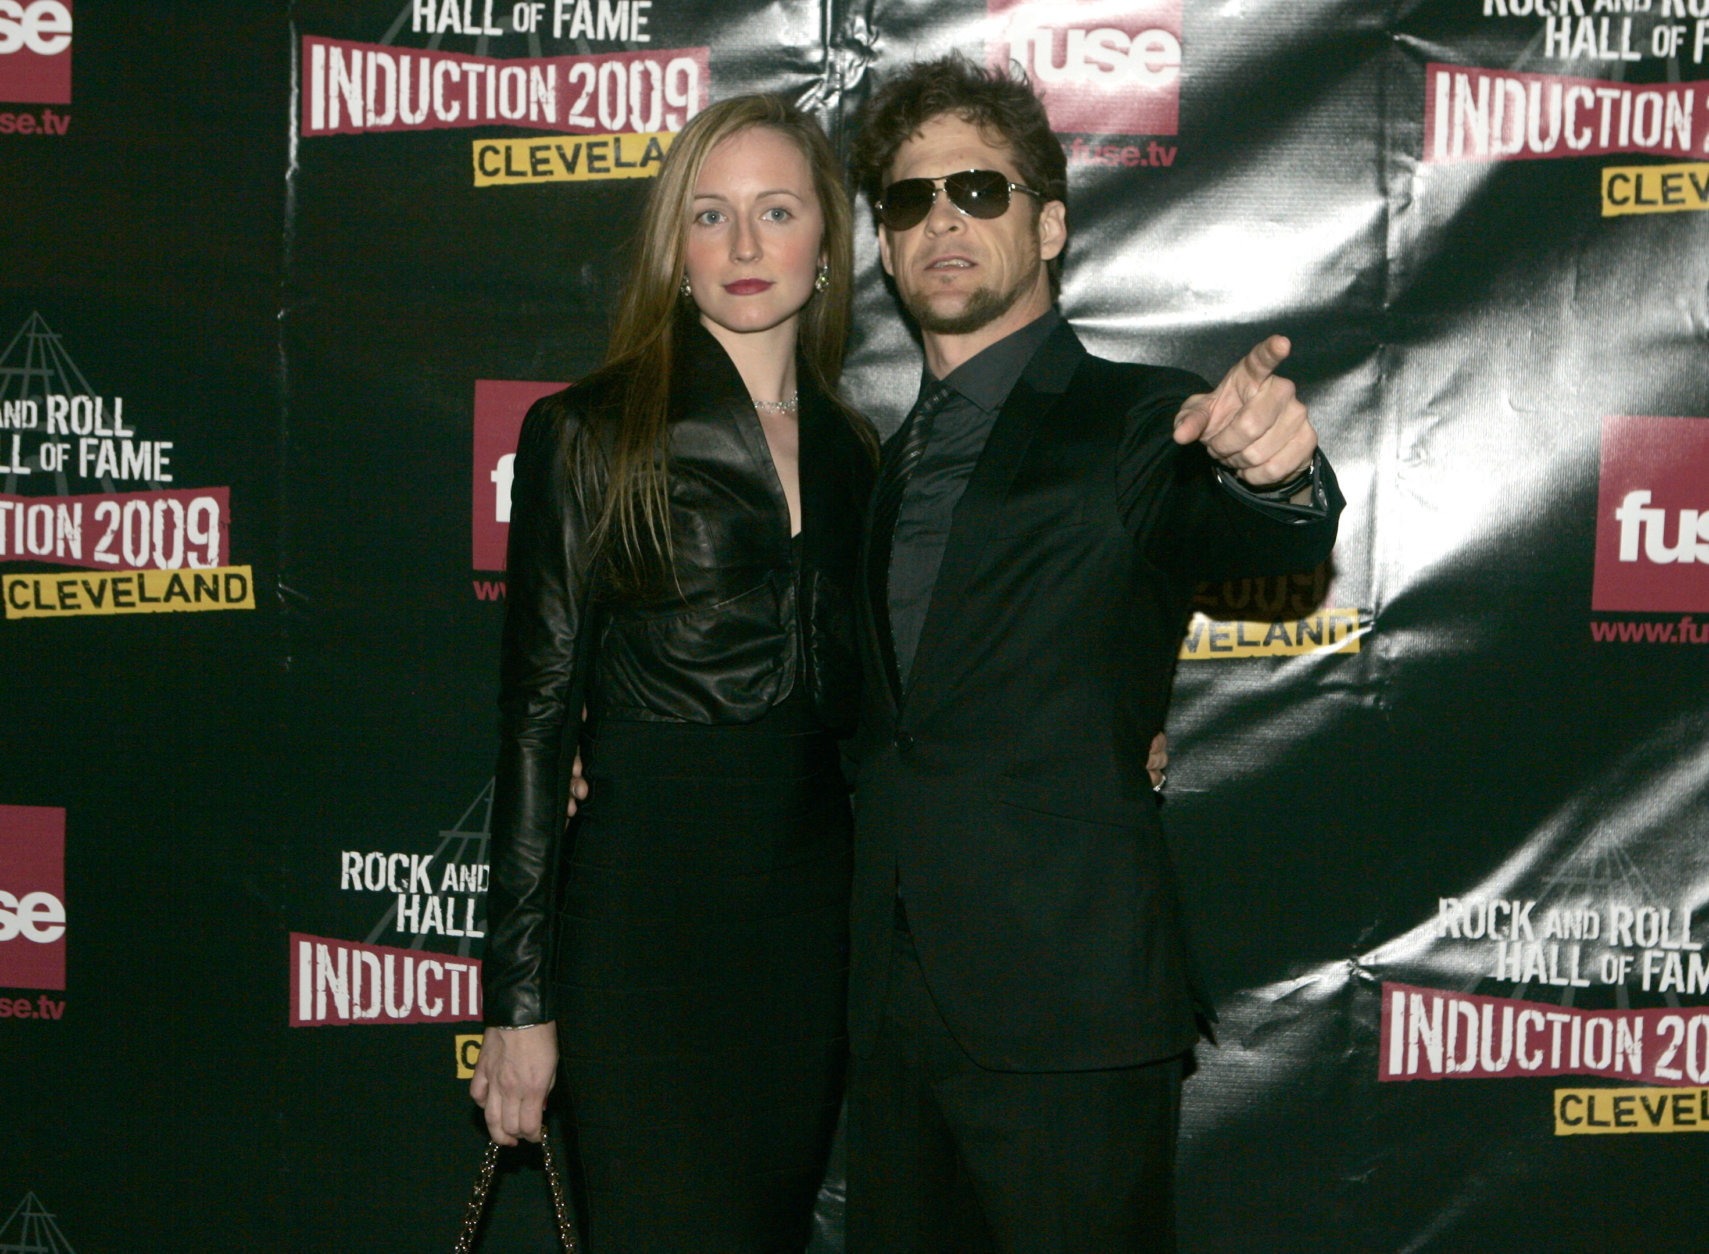 Nicole Smith and Jason Newsted of Metallica arrive on the red carpet for the 2009 Rock and Roll Hall of Fame Induction Ceremony Saturday, April 4, 2009 in Cleveland. (AP Photo/Tony Dejak)